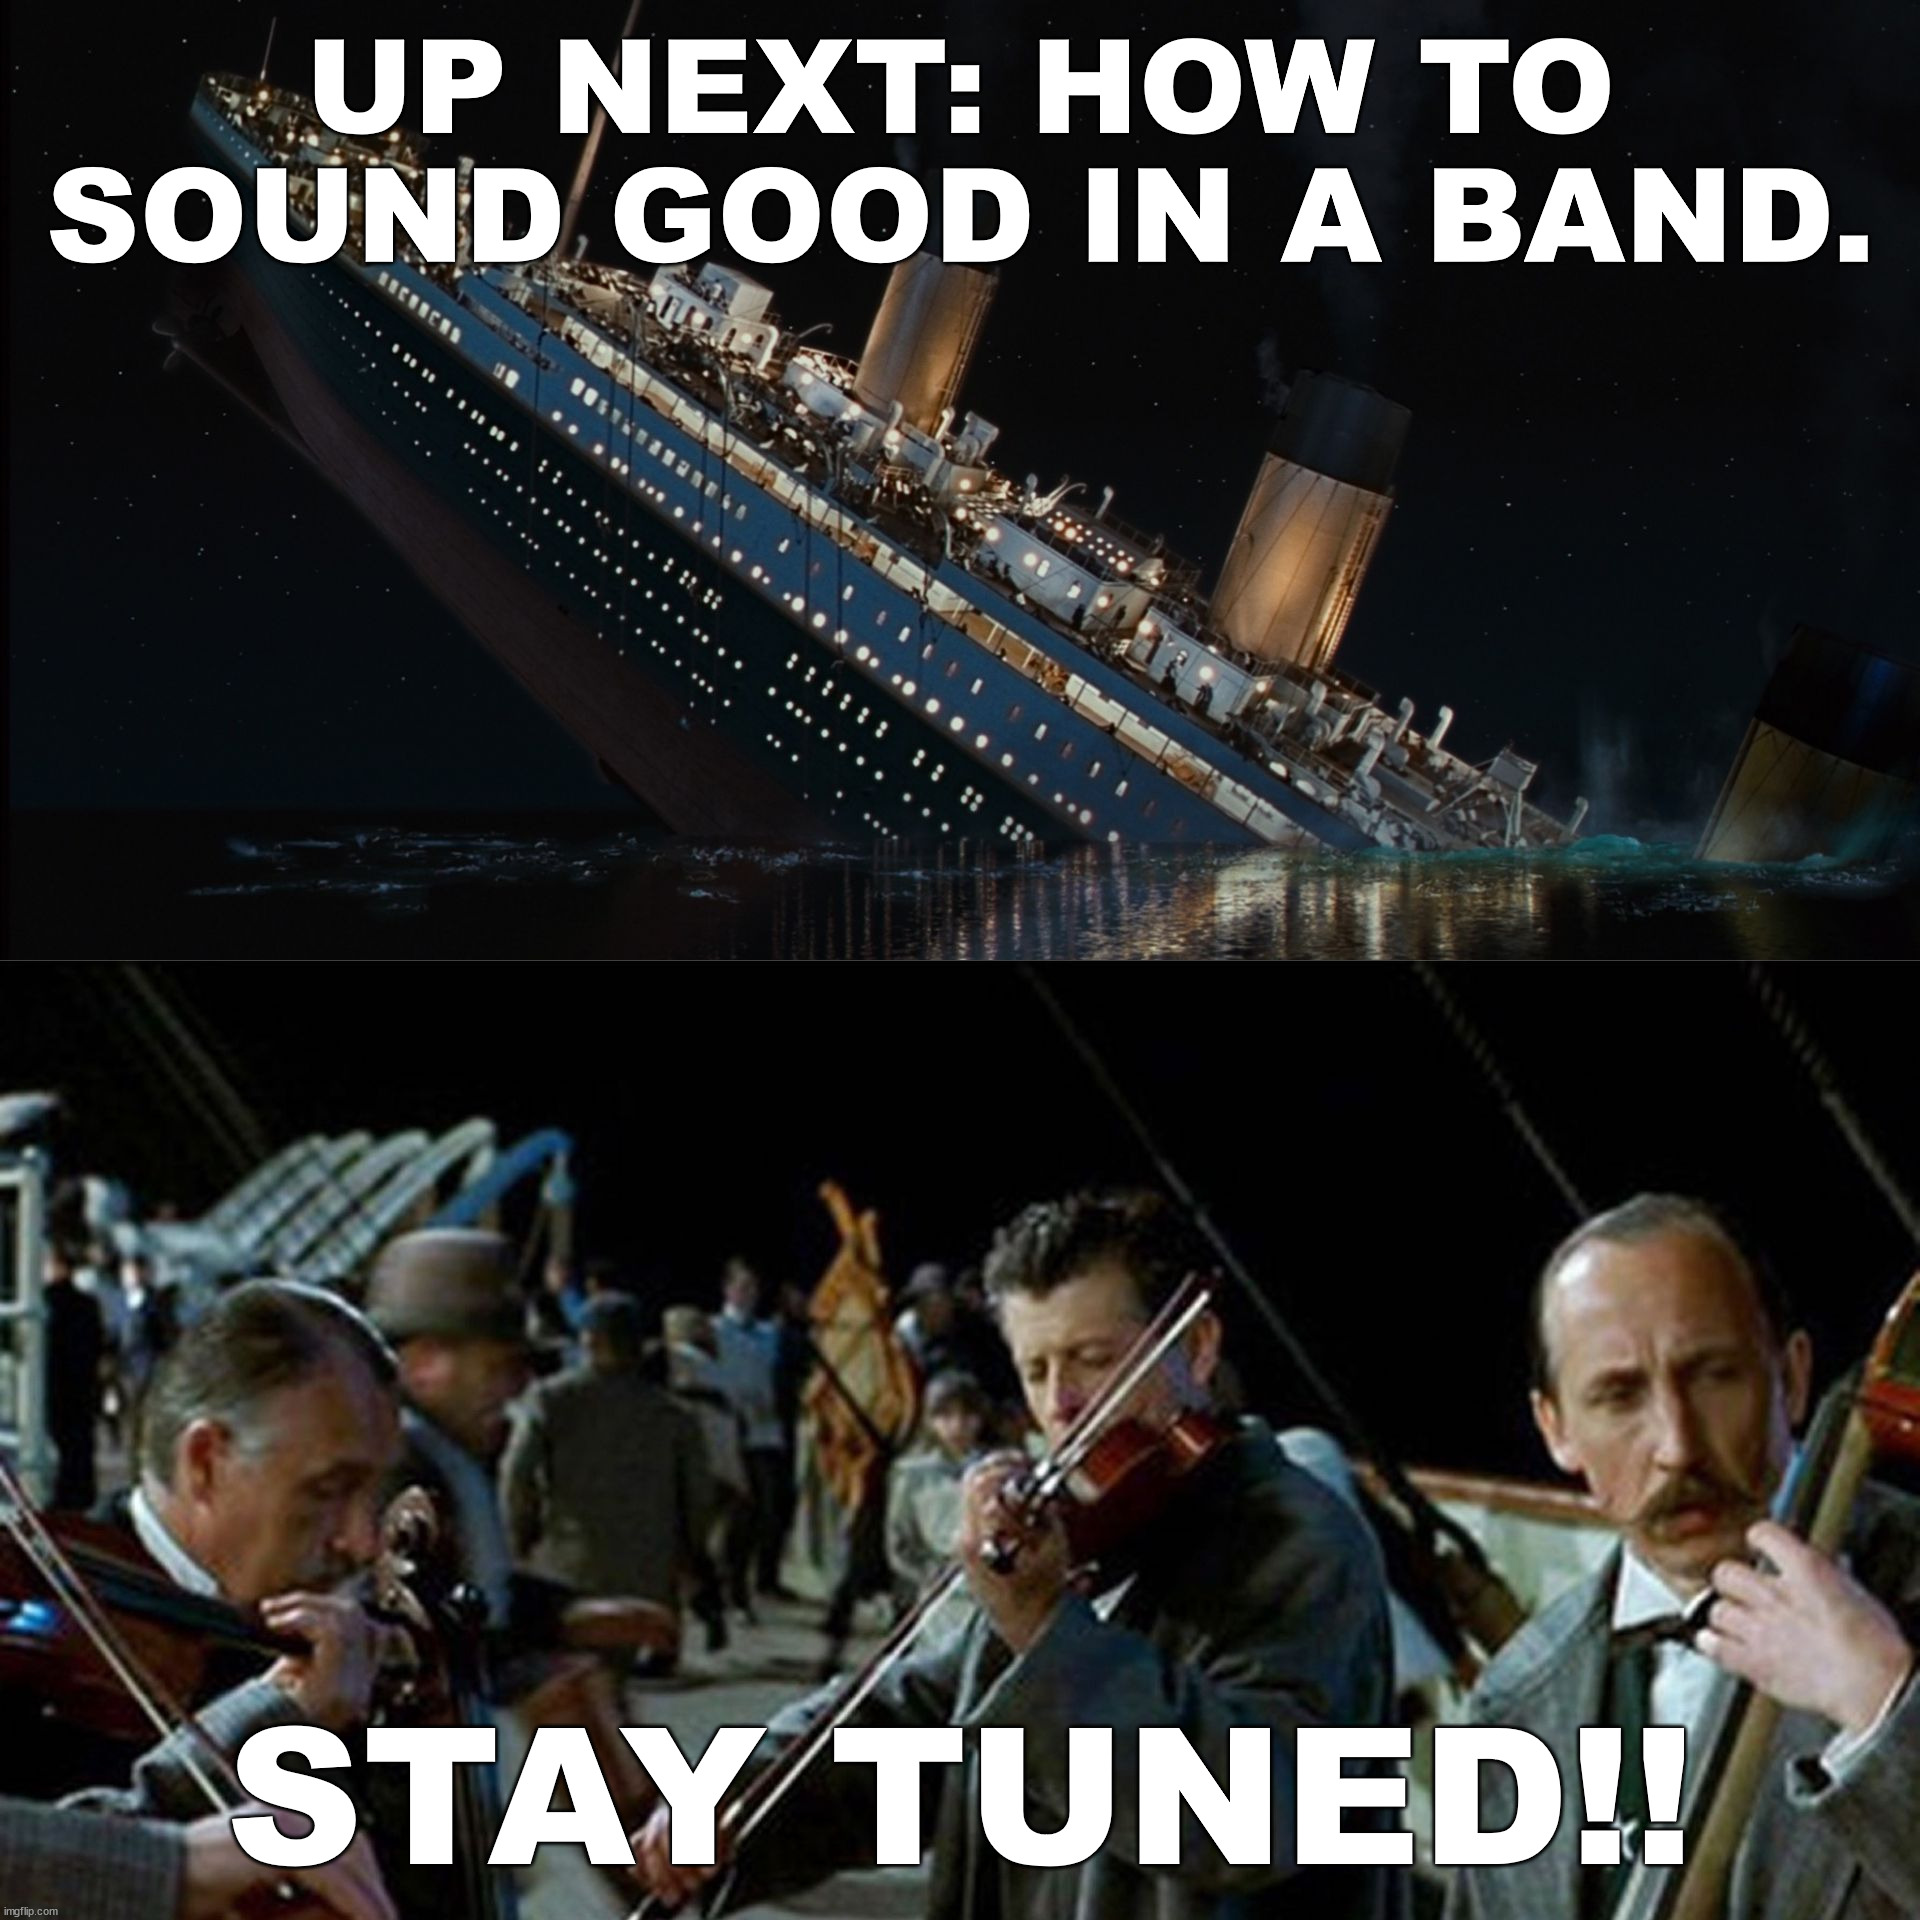 Titanic band | UP NEXT: HOW TO SOUND GOOD IN A BAND. STAY TUNED!! | image tagged in titanic band,eye roll | made w/ Imgflip meme maker